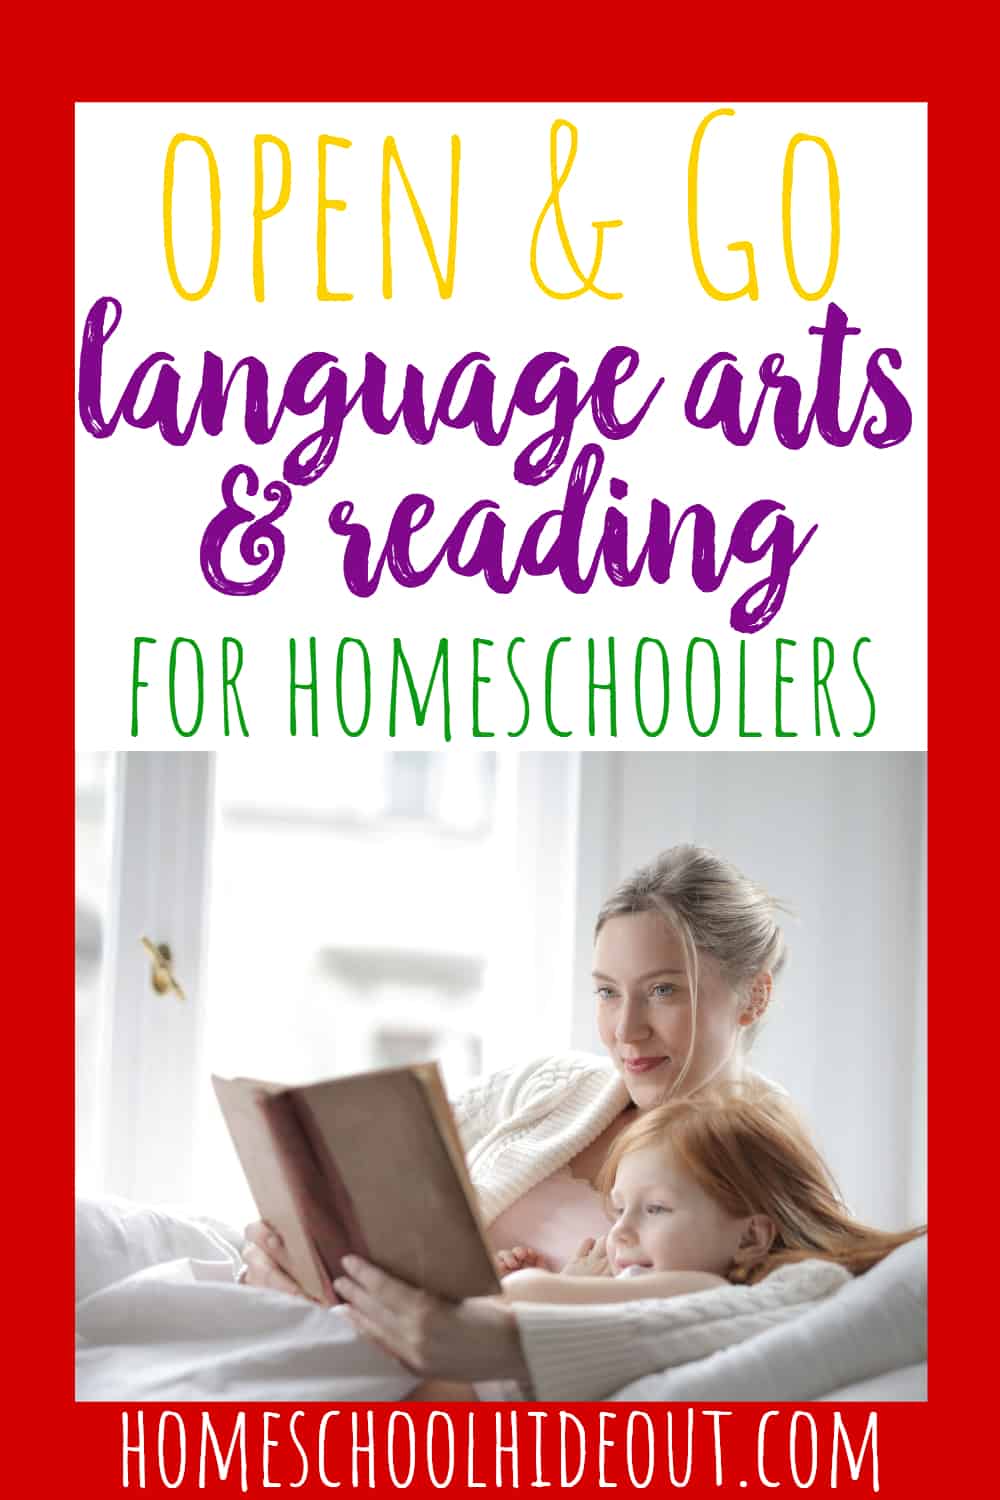 Pathways2.0 is an easy to use language arts and reading curriculum that is affordable and makes planning a breeze! #homeschoolers #productreview #homeschooling